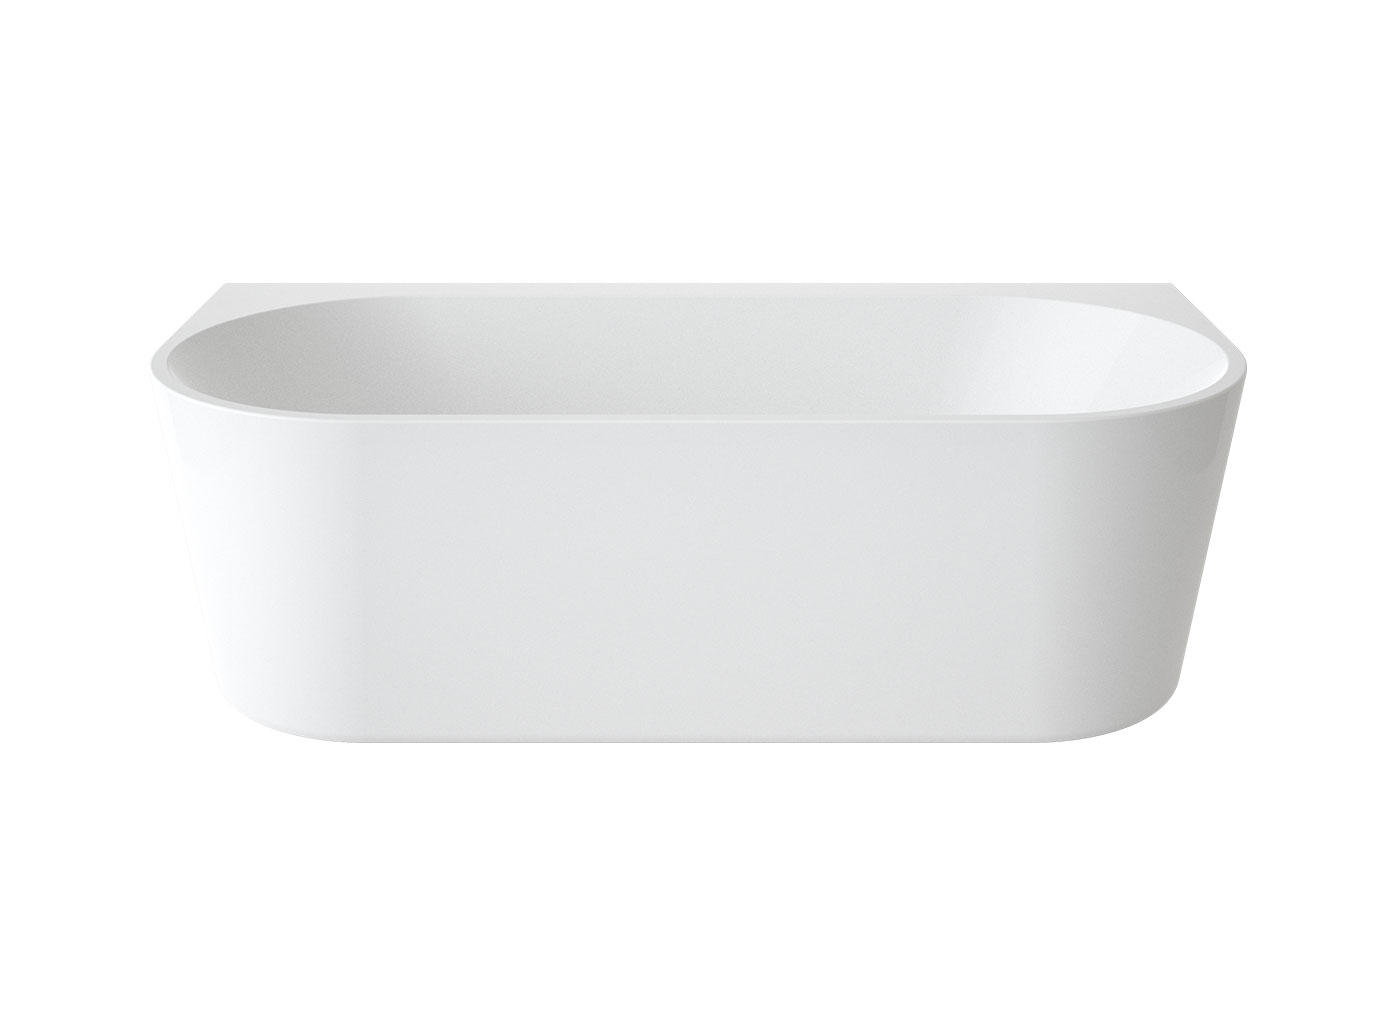 Combine the luxury of a freestanding bath with the practicalities of an island bath. This beautiful oval back to wall bath